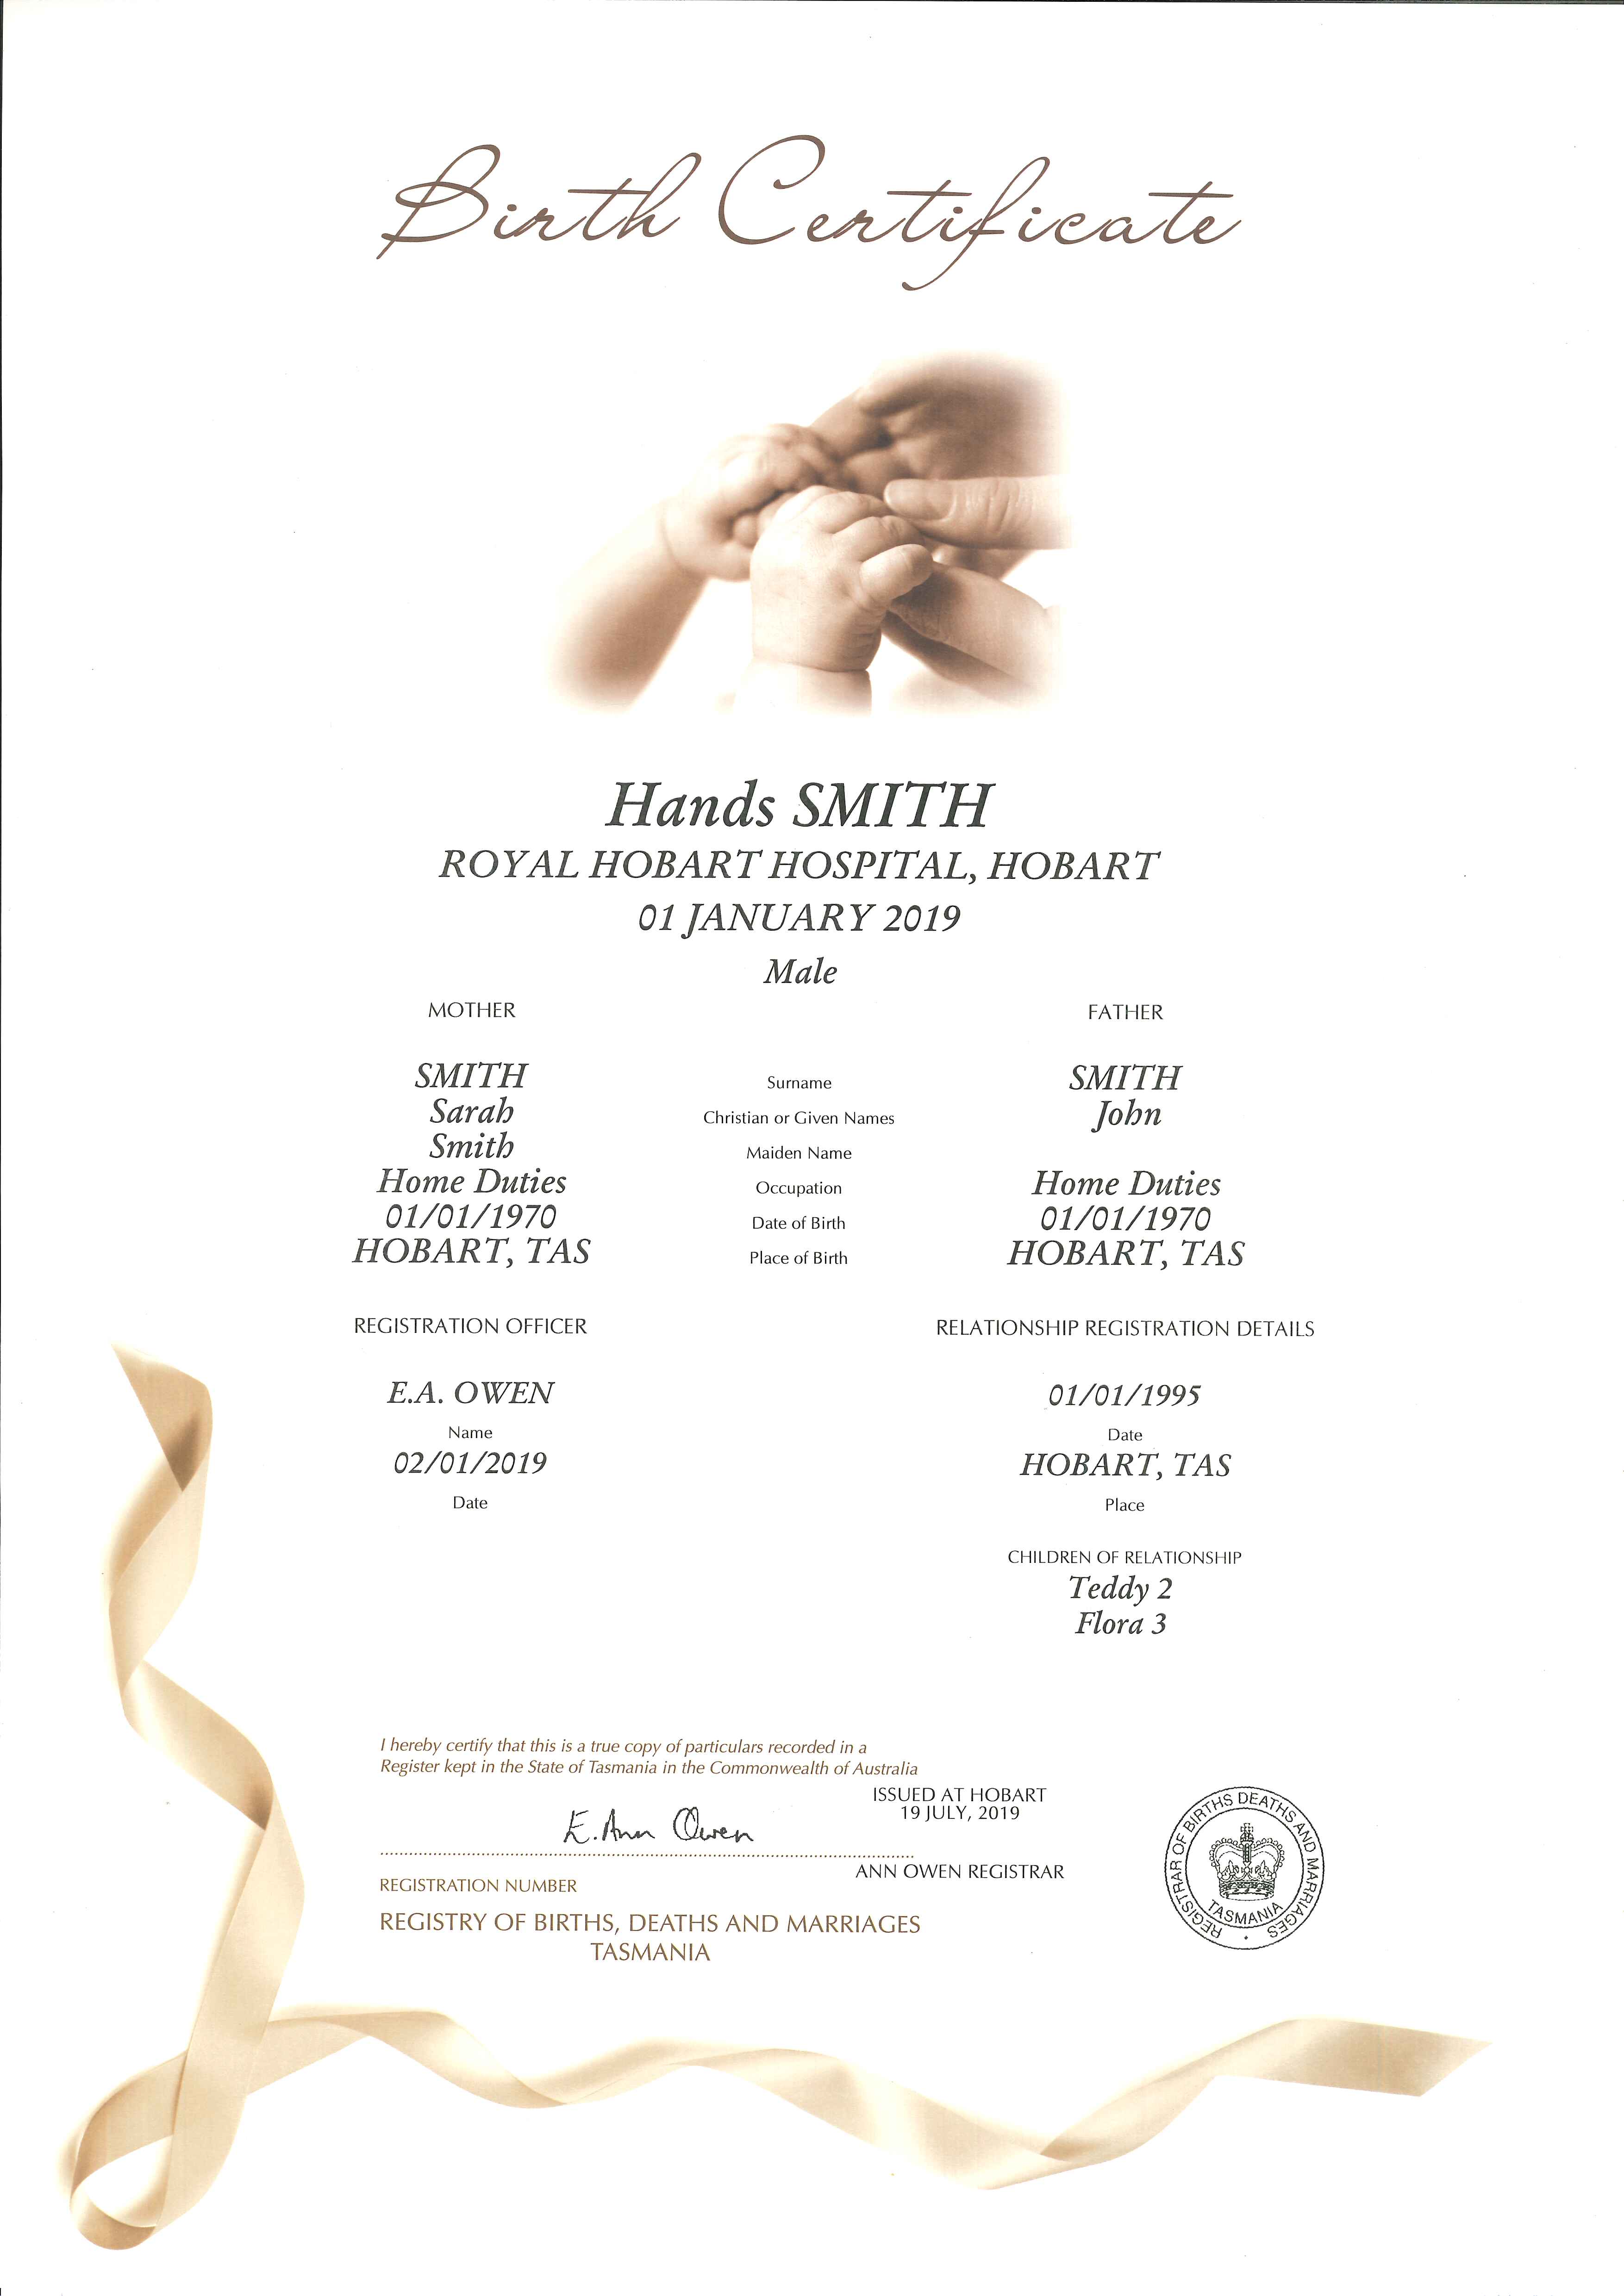 Decorative Birth Certificate. At the top of the page is an image of a parents hand holding a baby's hand in shades of sepia browns. At the bottom of the page is a ribbon that wraps from the bottom of the page to half way up the left hand side of the page. The ribbon is in shades of brown to match the hands image.